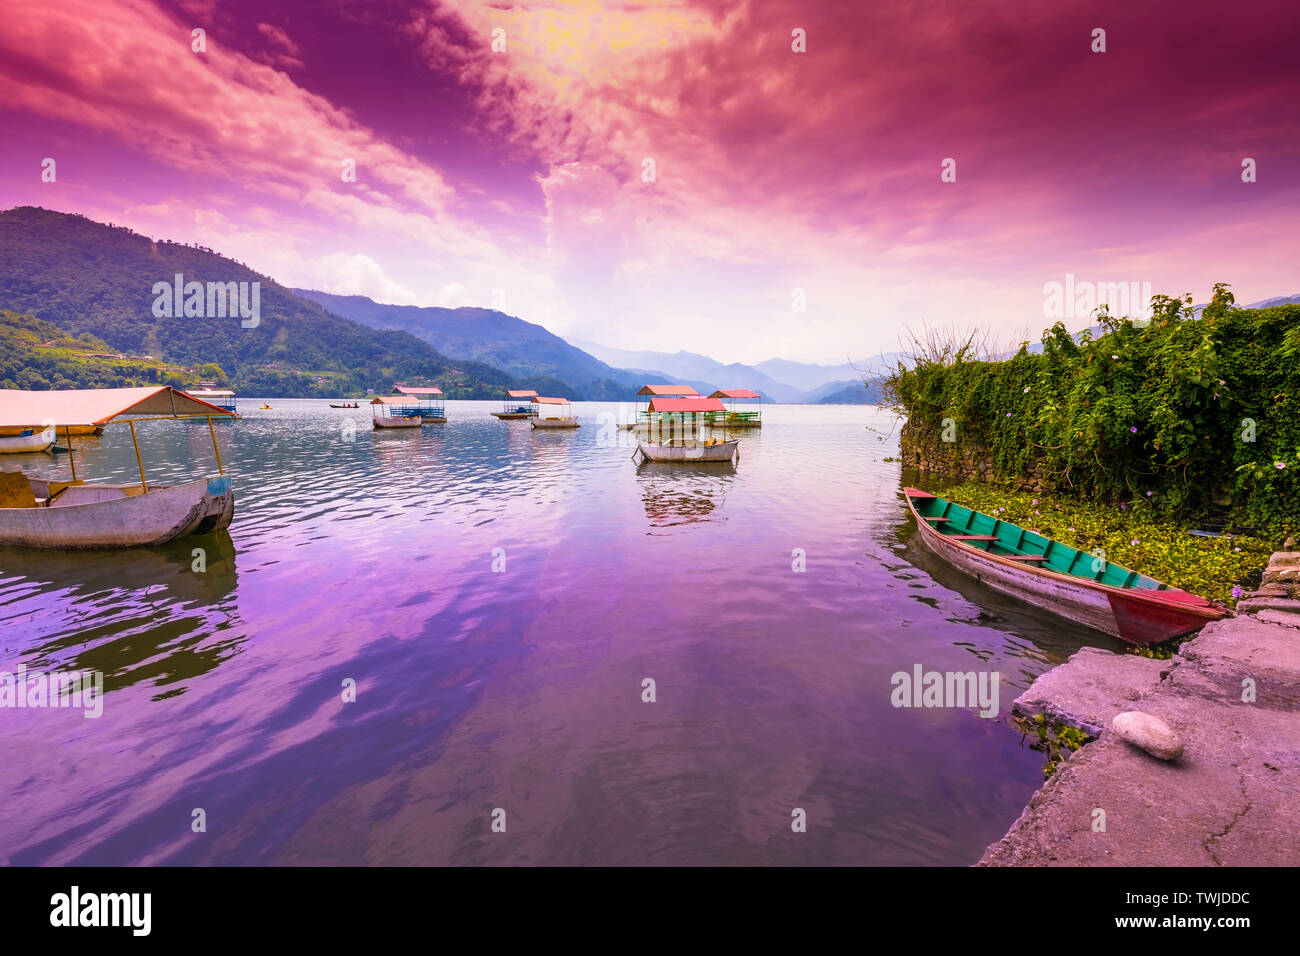 Colorful Pedal Boats Parked In Phewa Lake, blue hills and sunset ...